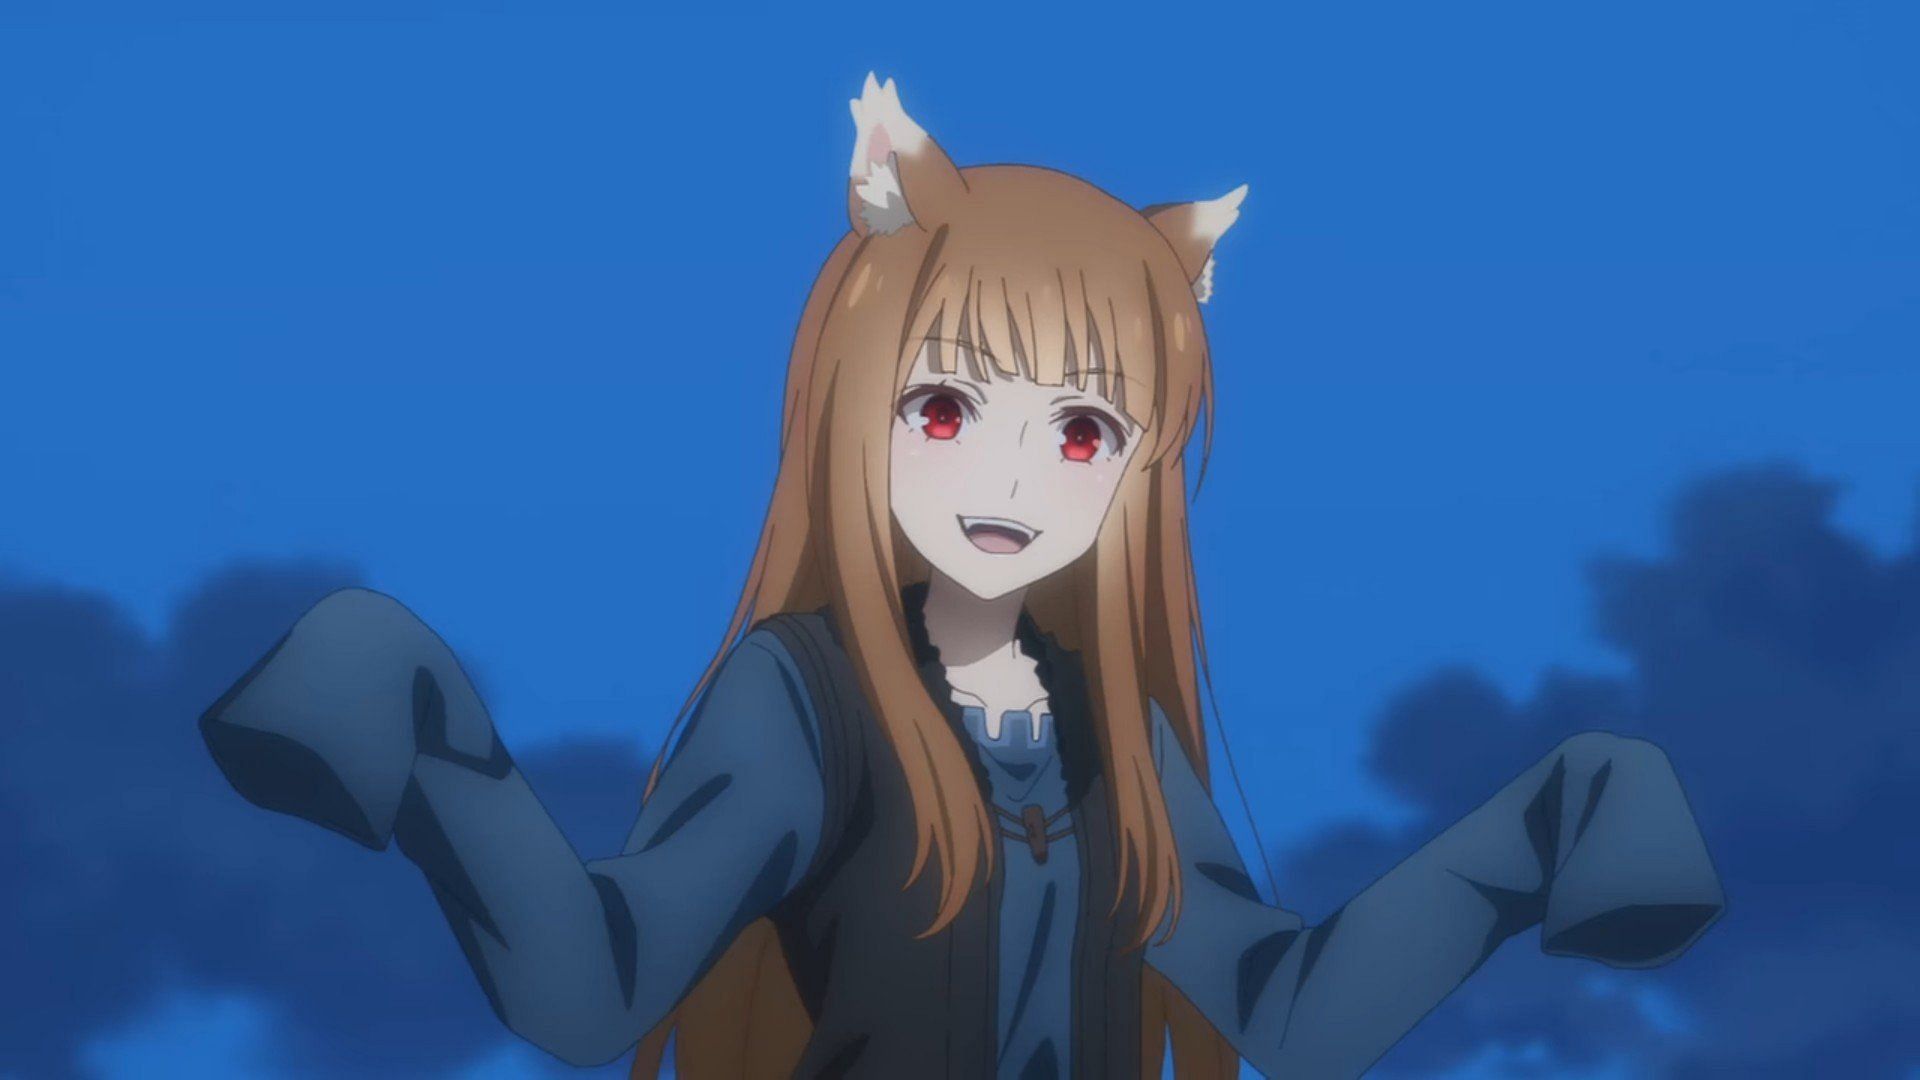 Holo, as seen in the episode 1 of the anime (Image via Studio Passione)